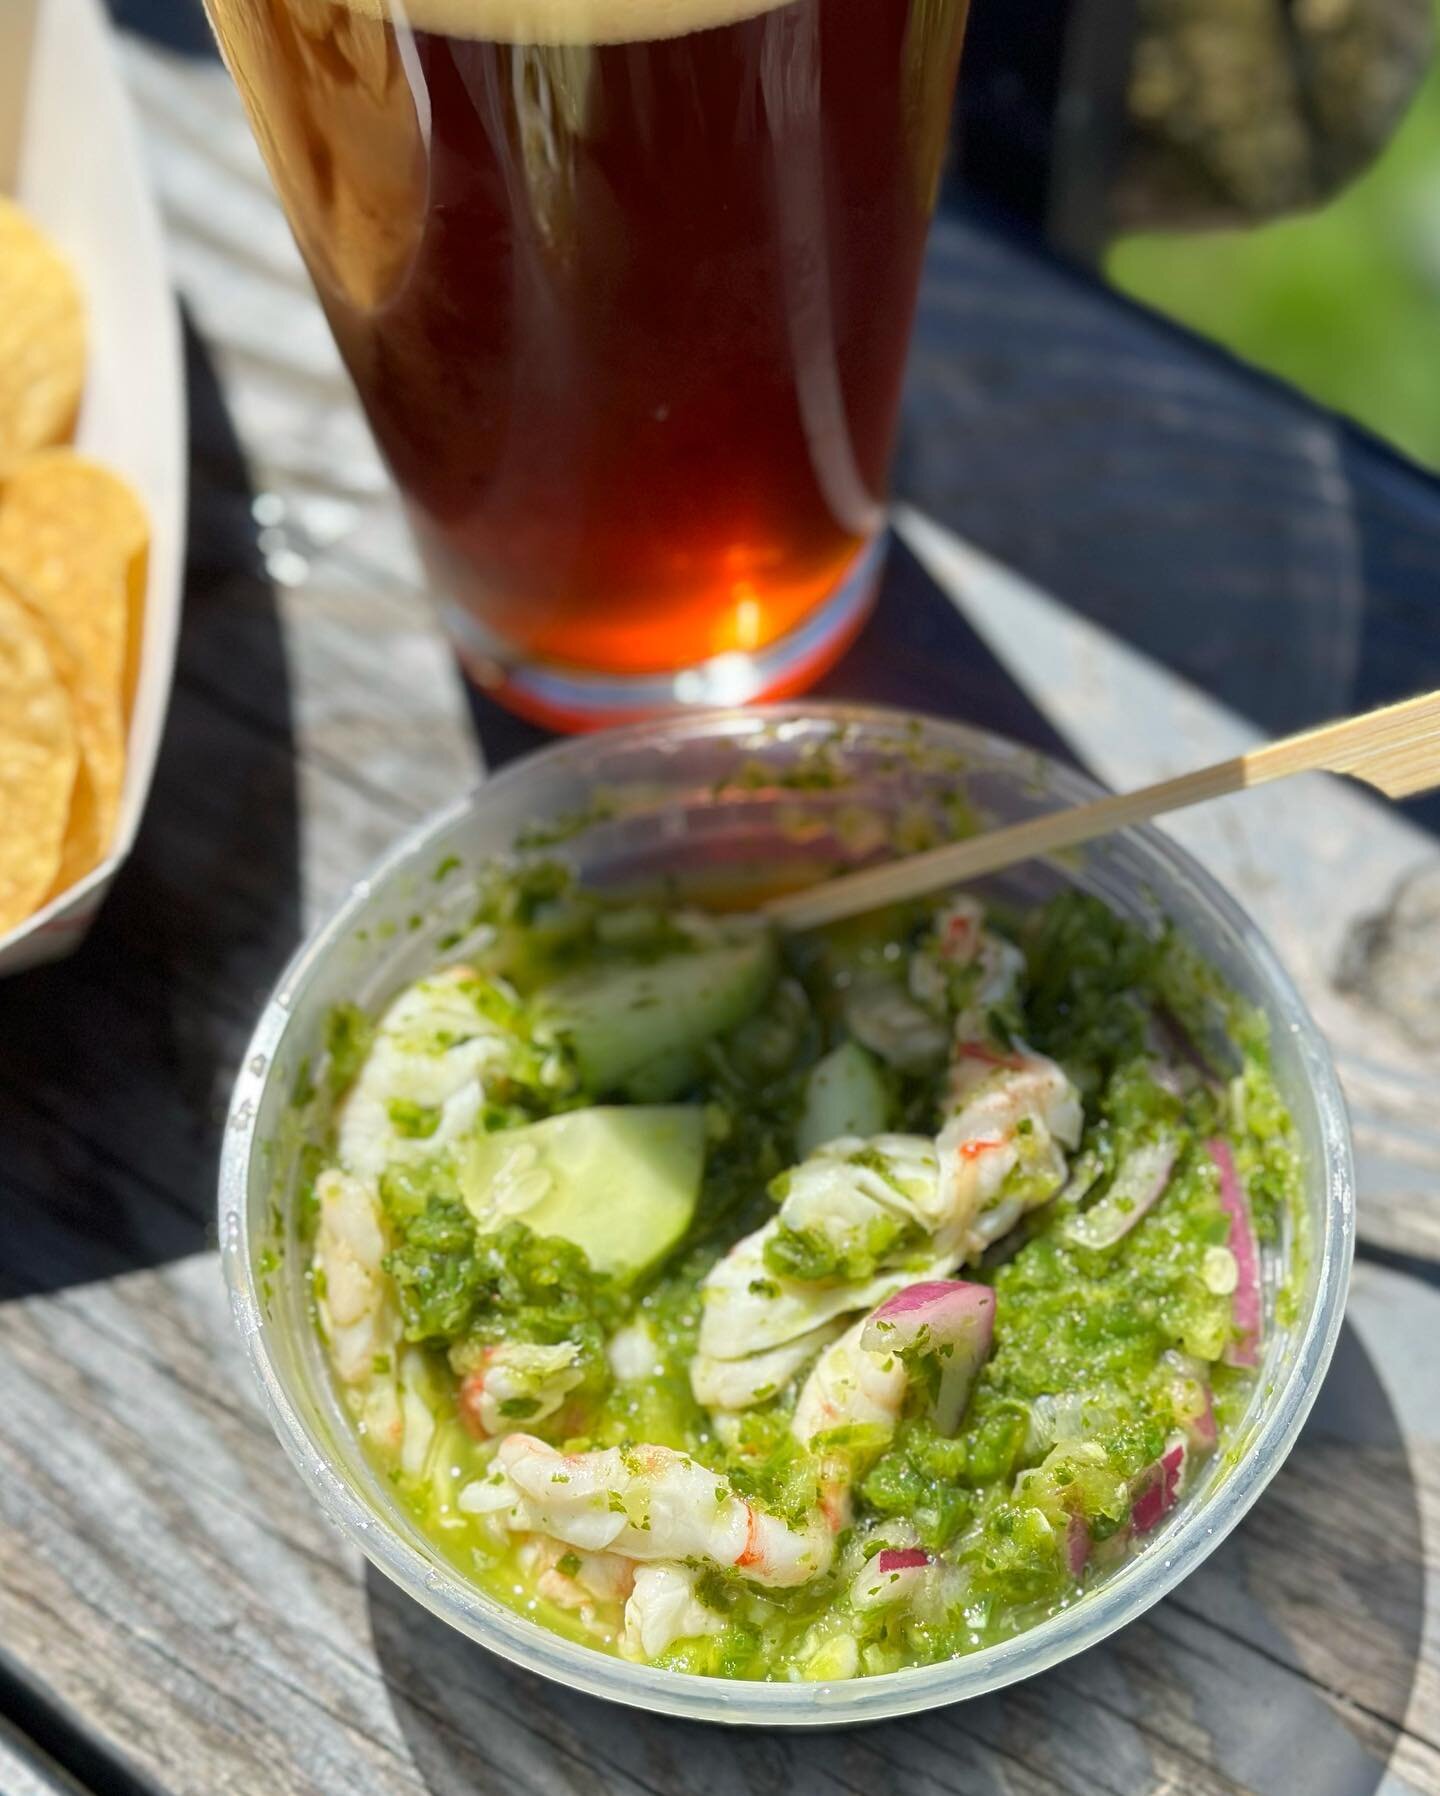 🚨new appy alert!🚨

scallop or shrimp aguachile available NOW and served at the same time as your bevy. 🍻🍤

#dontsleeponit #appy #brewsandviews #beerthirty #tidetotable #shuckslurprepeat #seafood #aguachile #dhospecial #draytonharboroystercompany